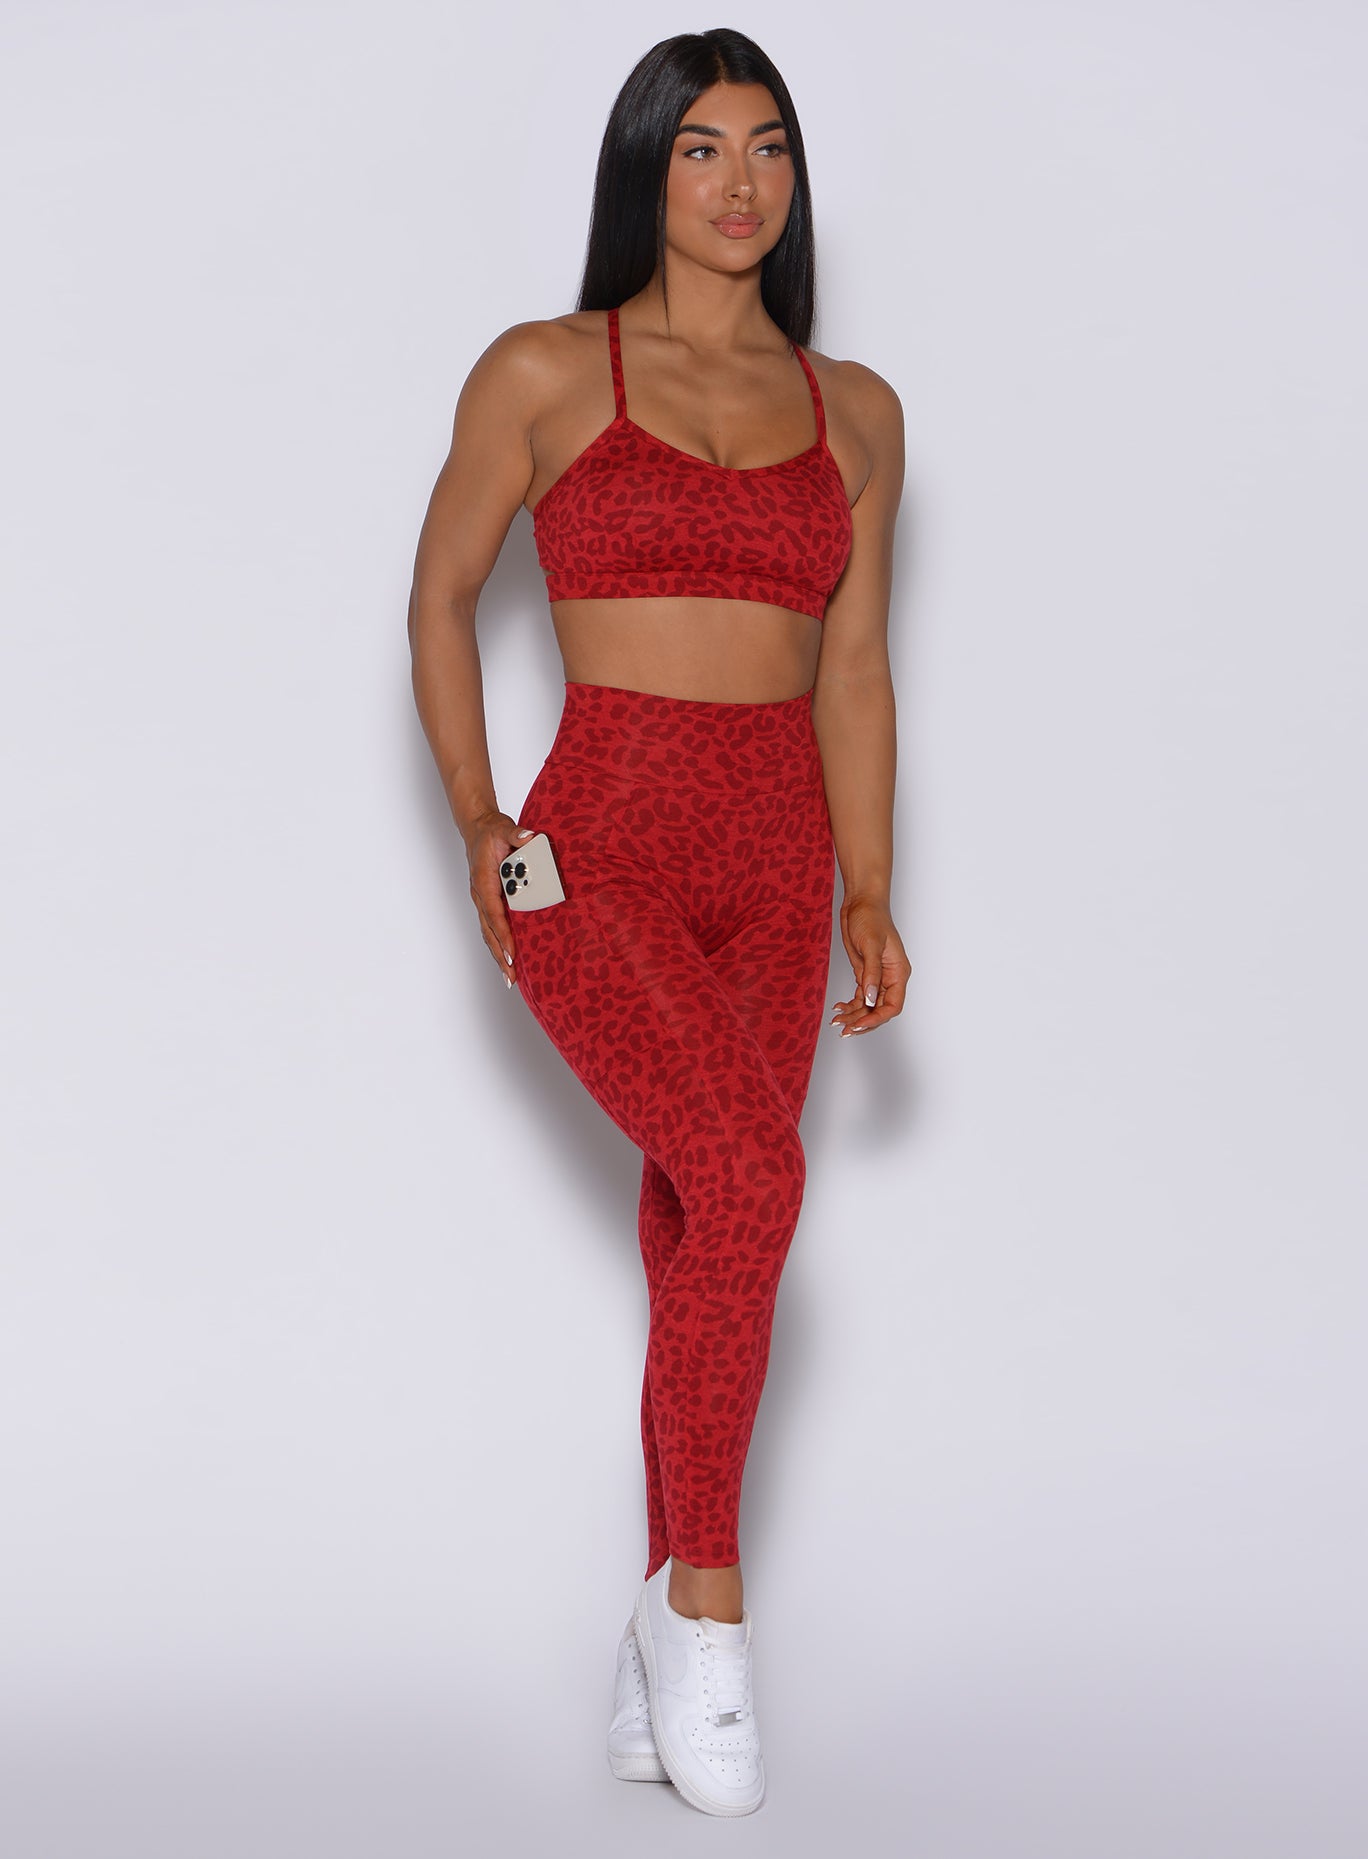 Front profile view of a model in our curves leggings in red cheetah color and a matching bombshell bra